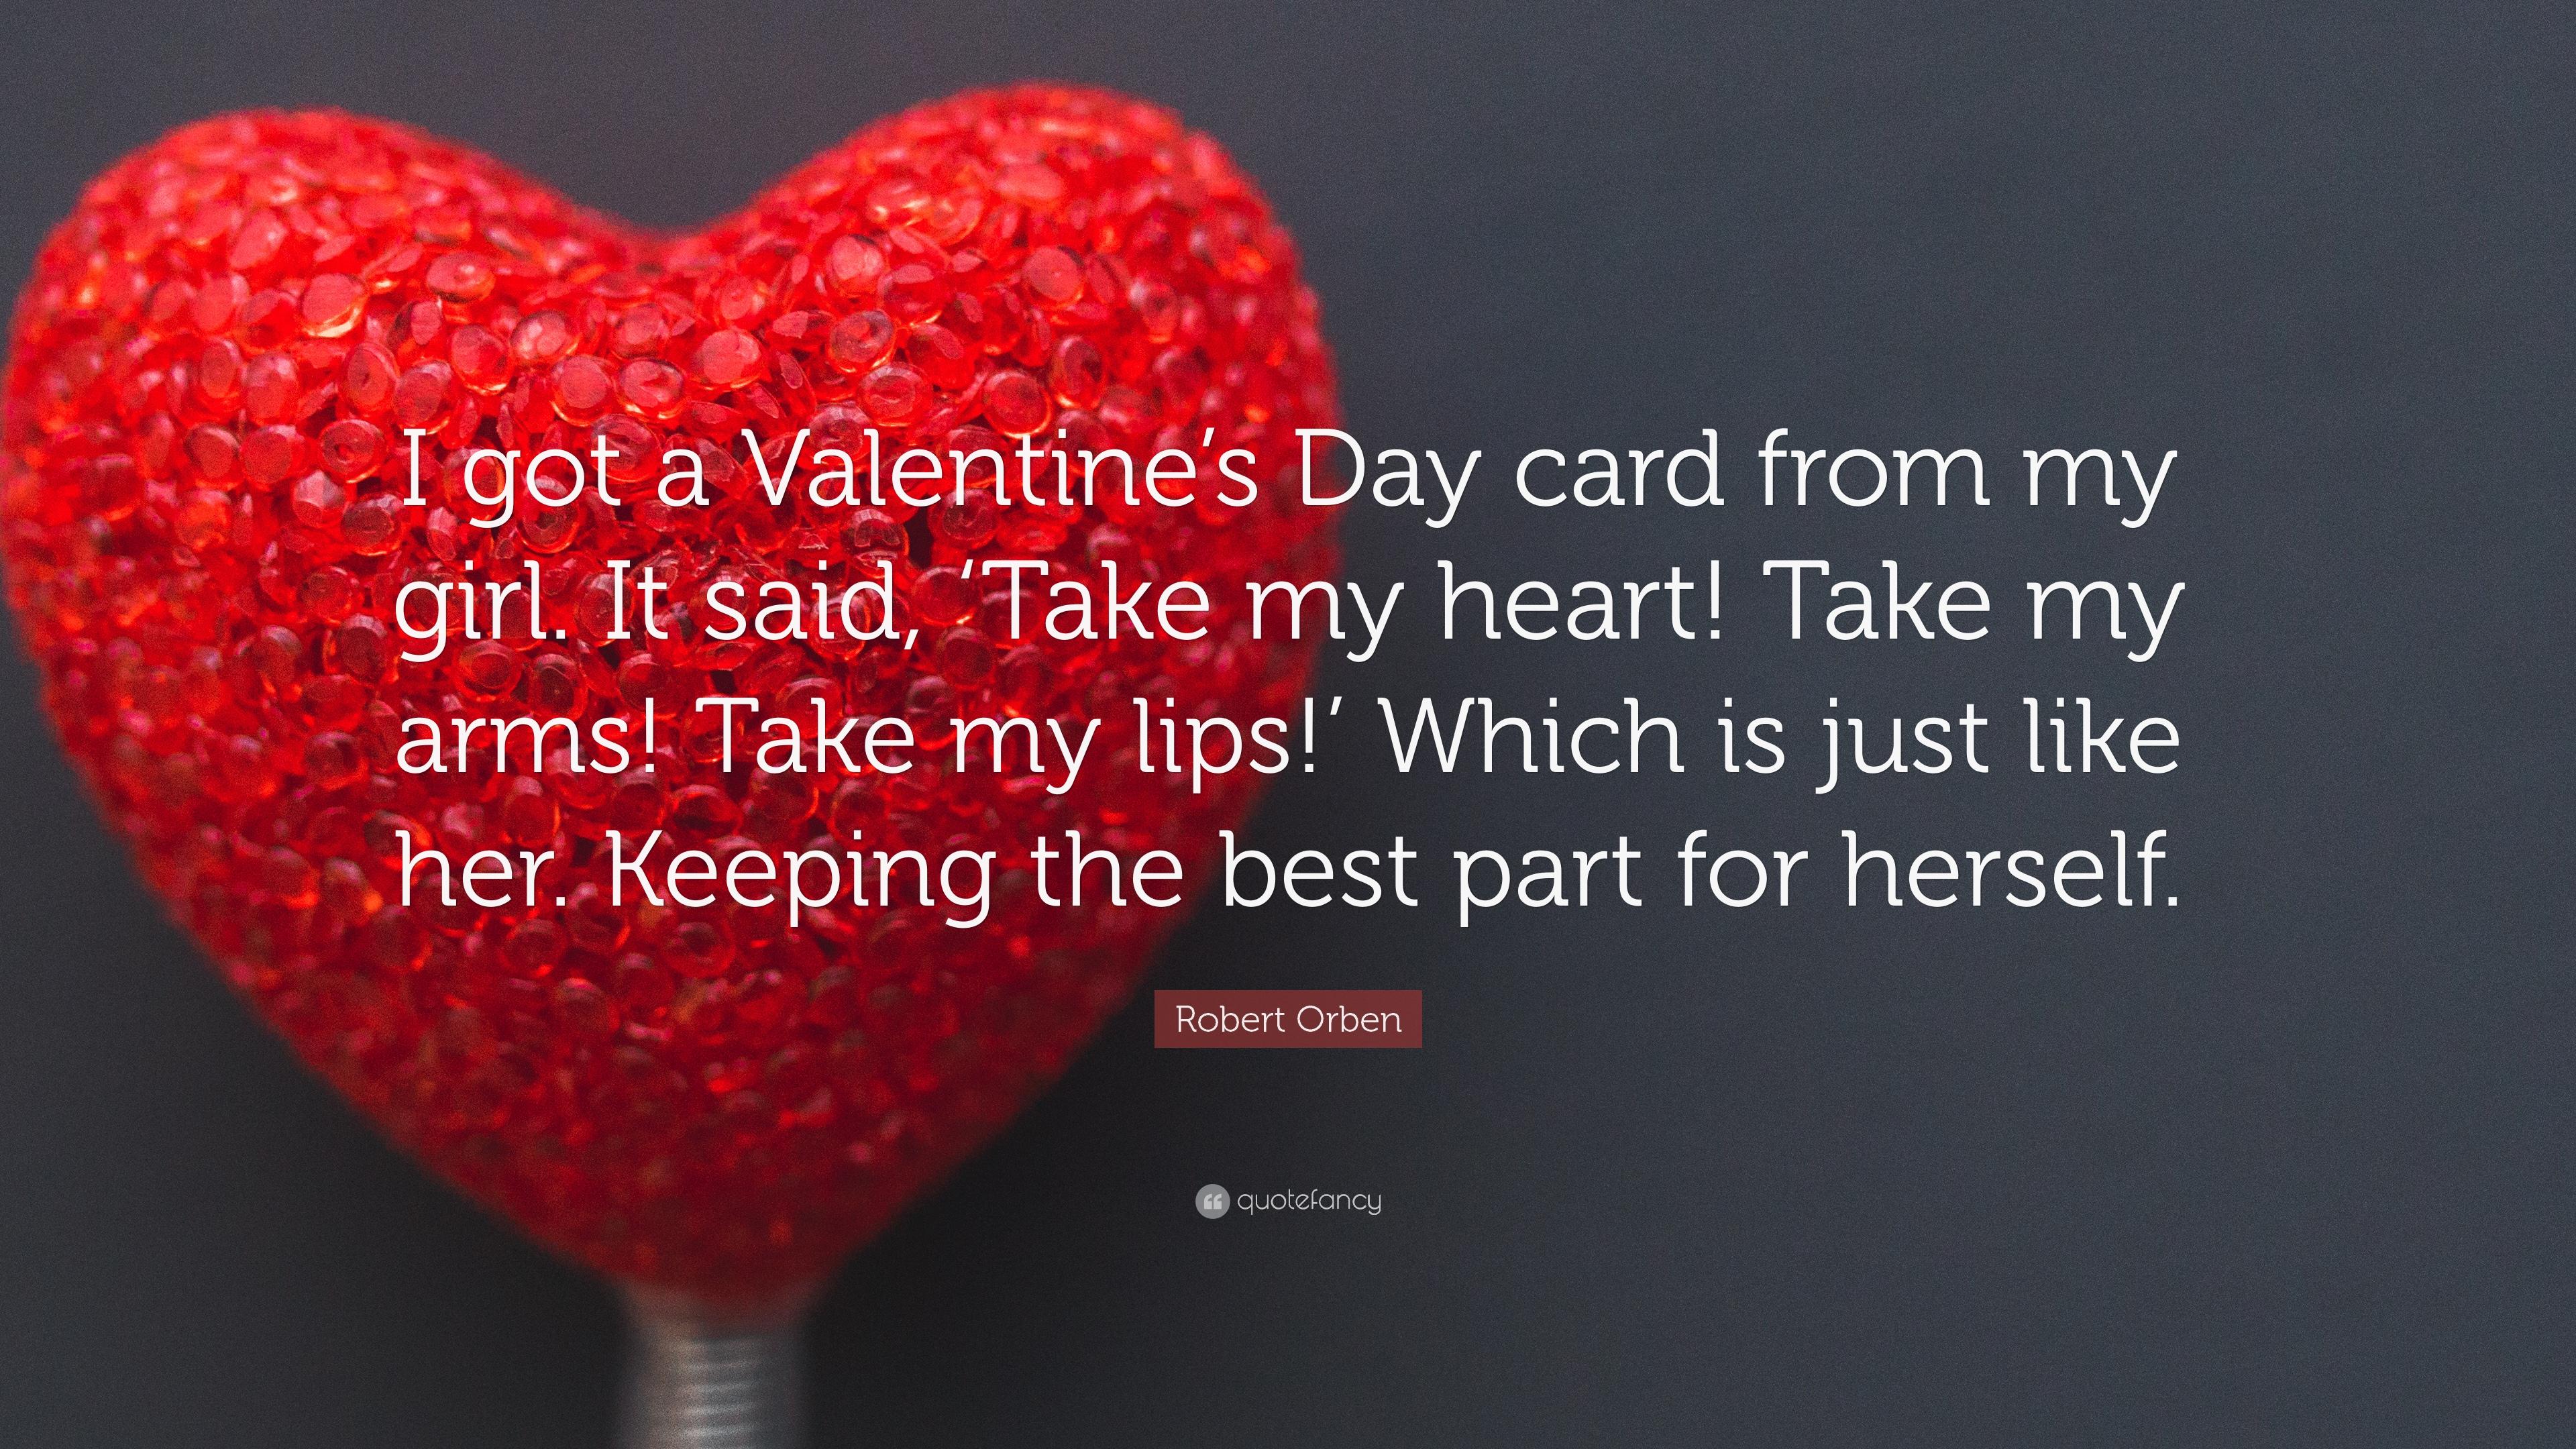 Robert Orben Quote: “I got a Valentine's Day card from my girl. It